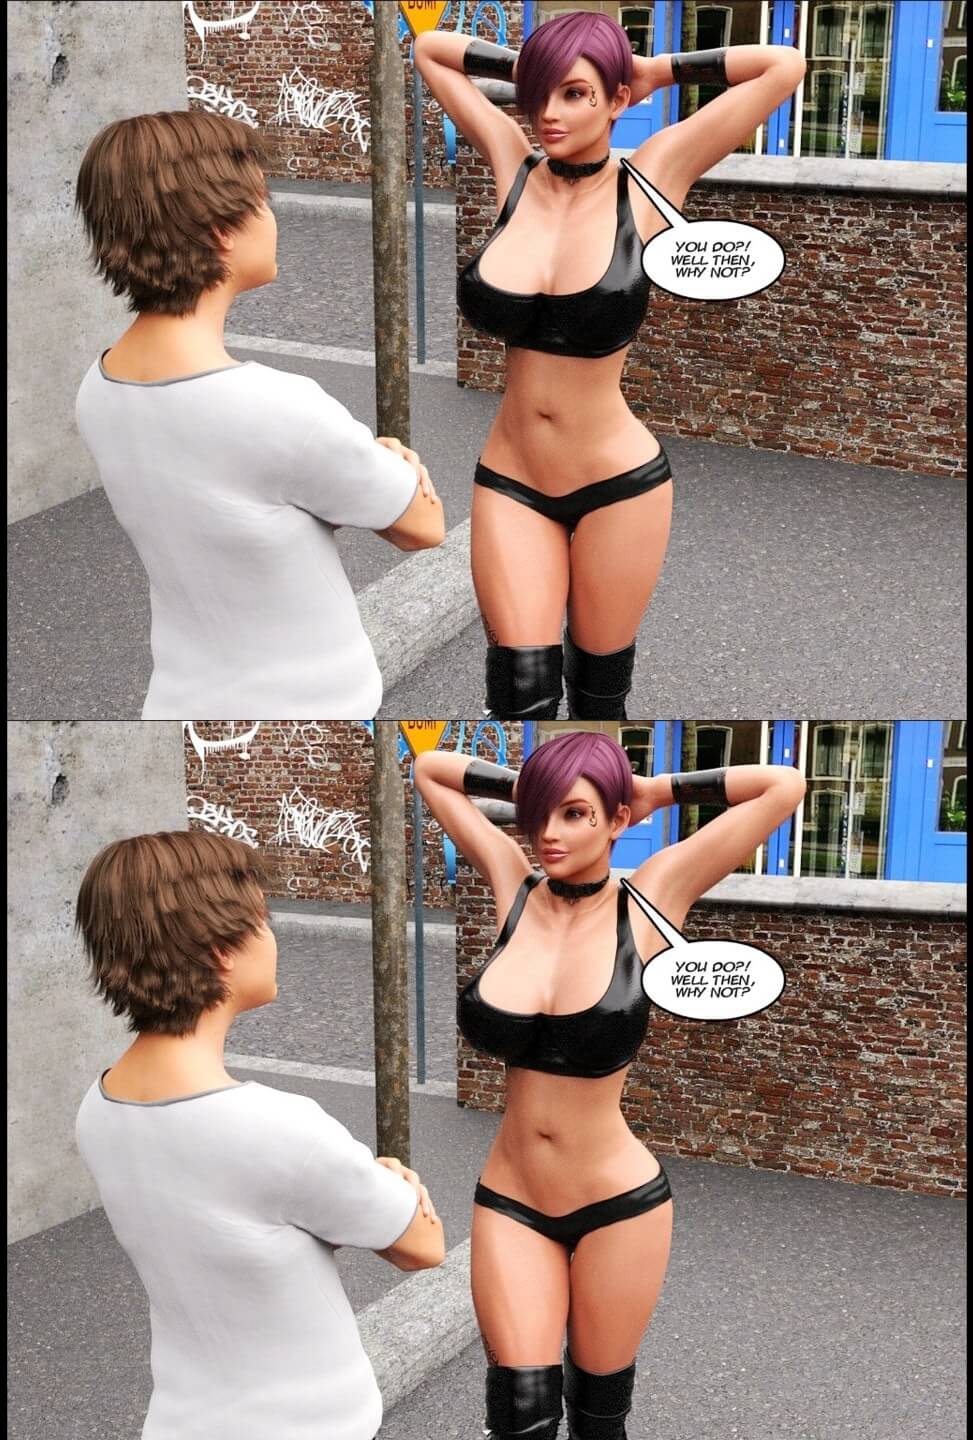 incest 3d nude 3D Family Incest and other sex comics - Page 57 - Free Porn ...